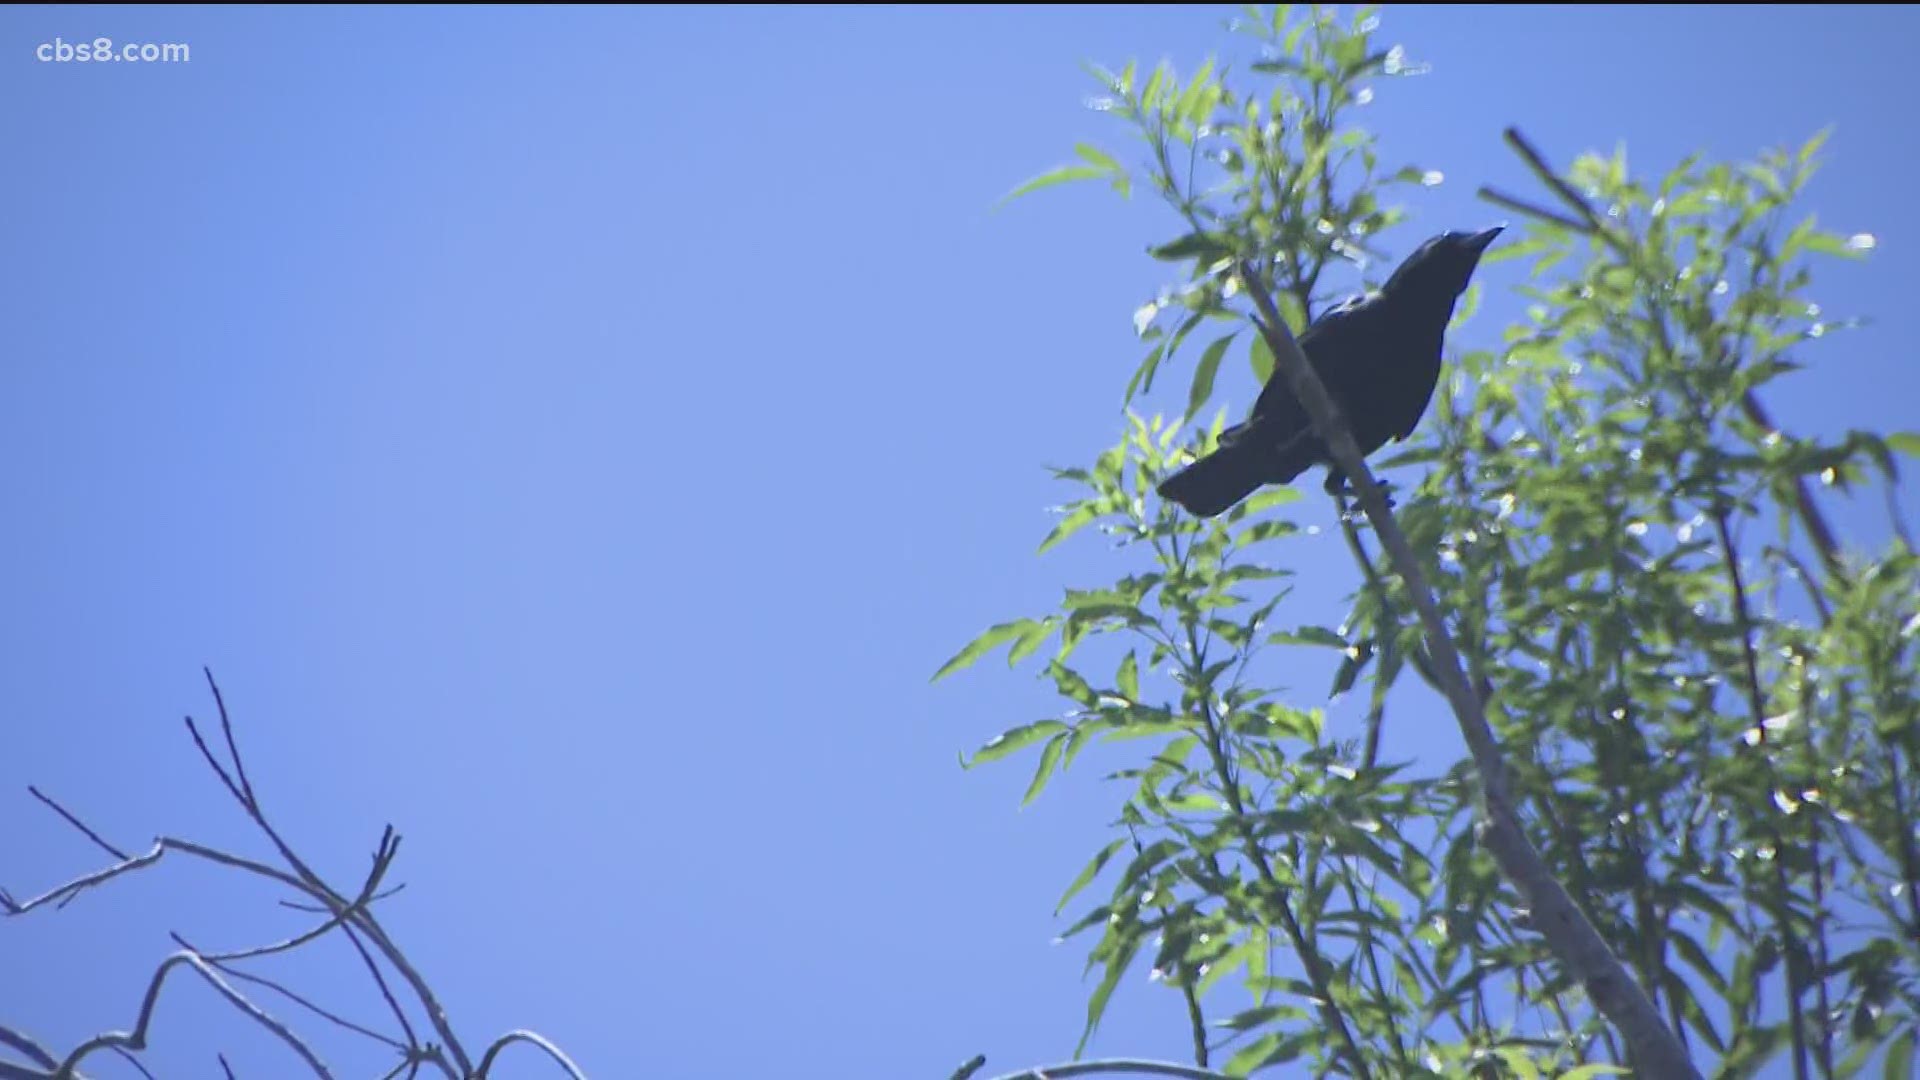 Have you noticed more crows in San Diego? News 8's Shawn Styles talked to the Audubon Society to explain the increase in crows in the region.